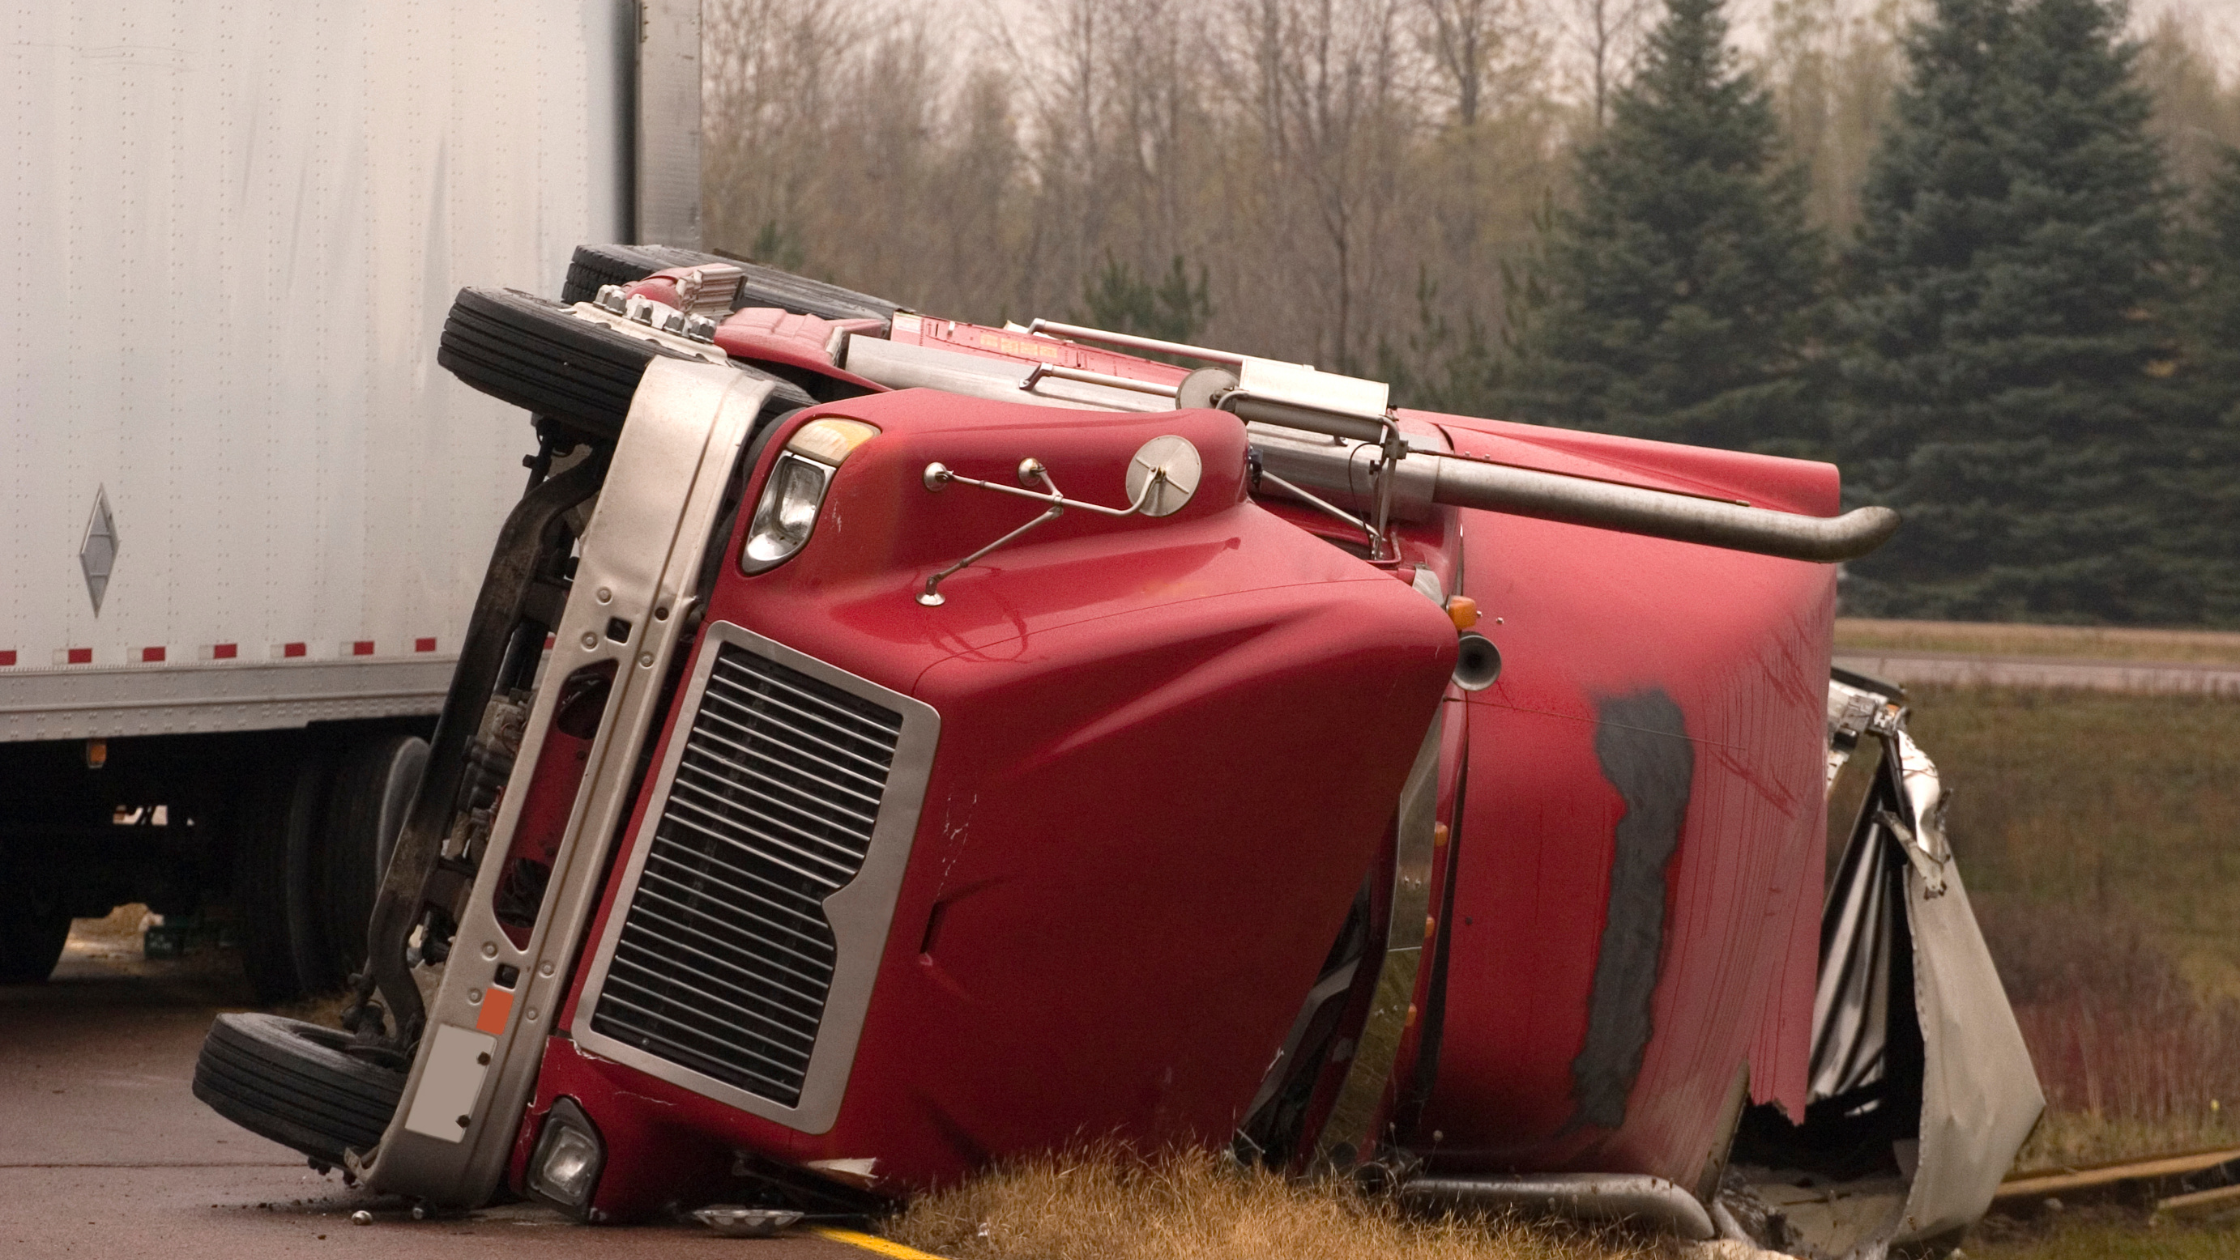 How to Prevent Rollover Incidents While Driving